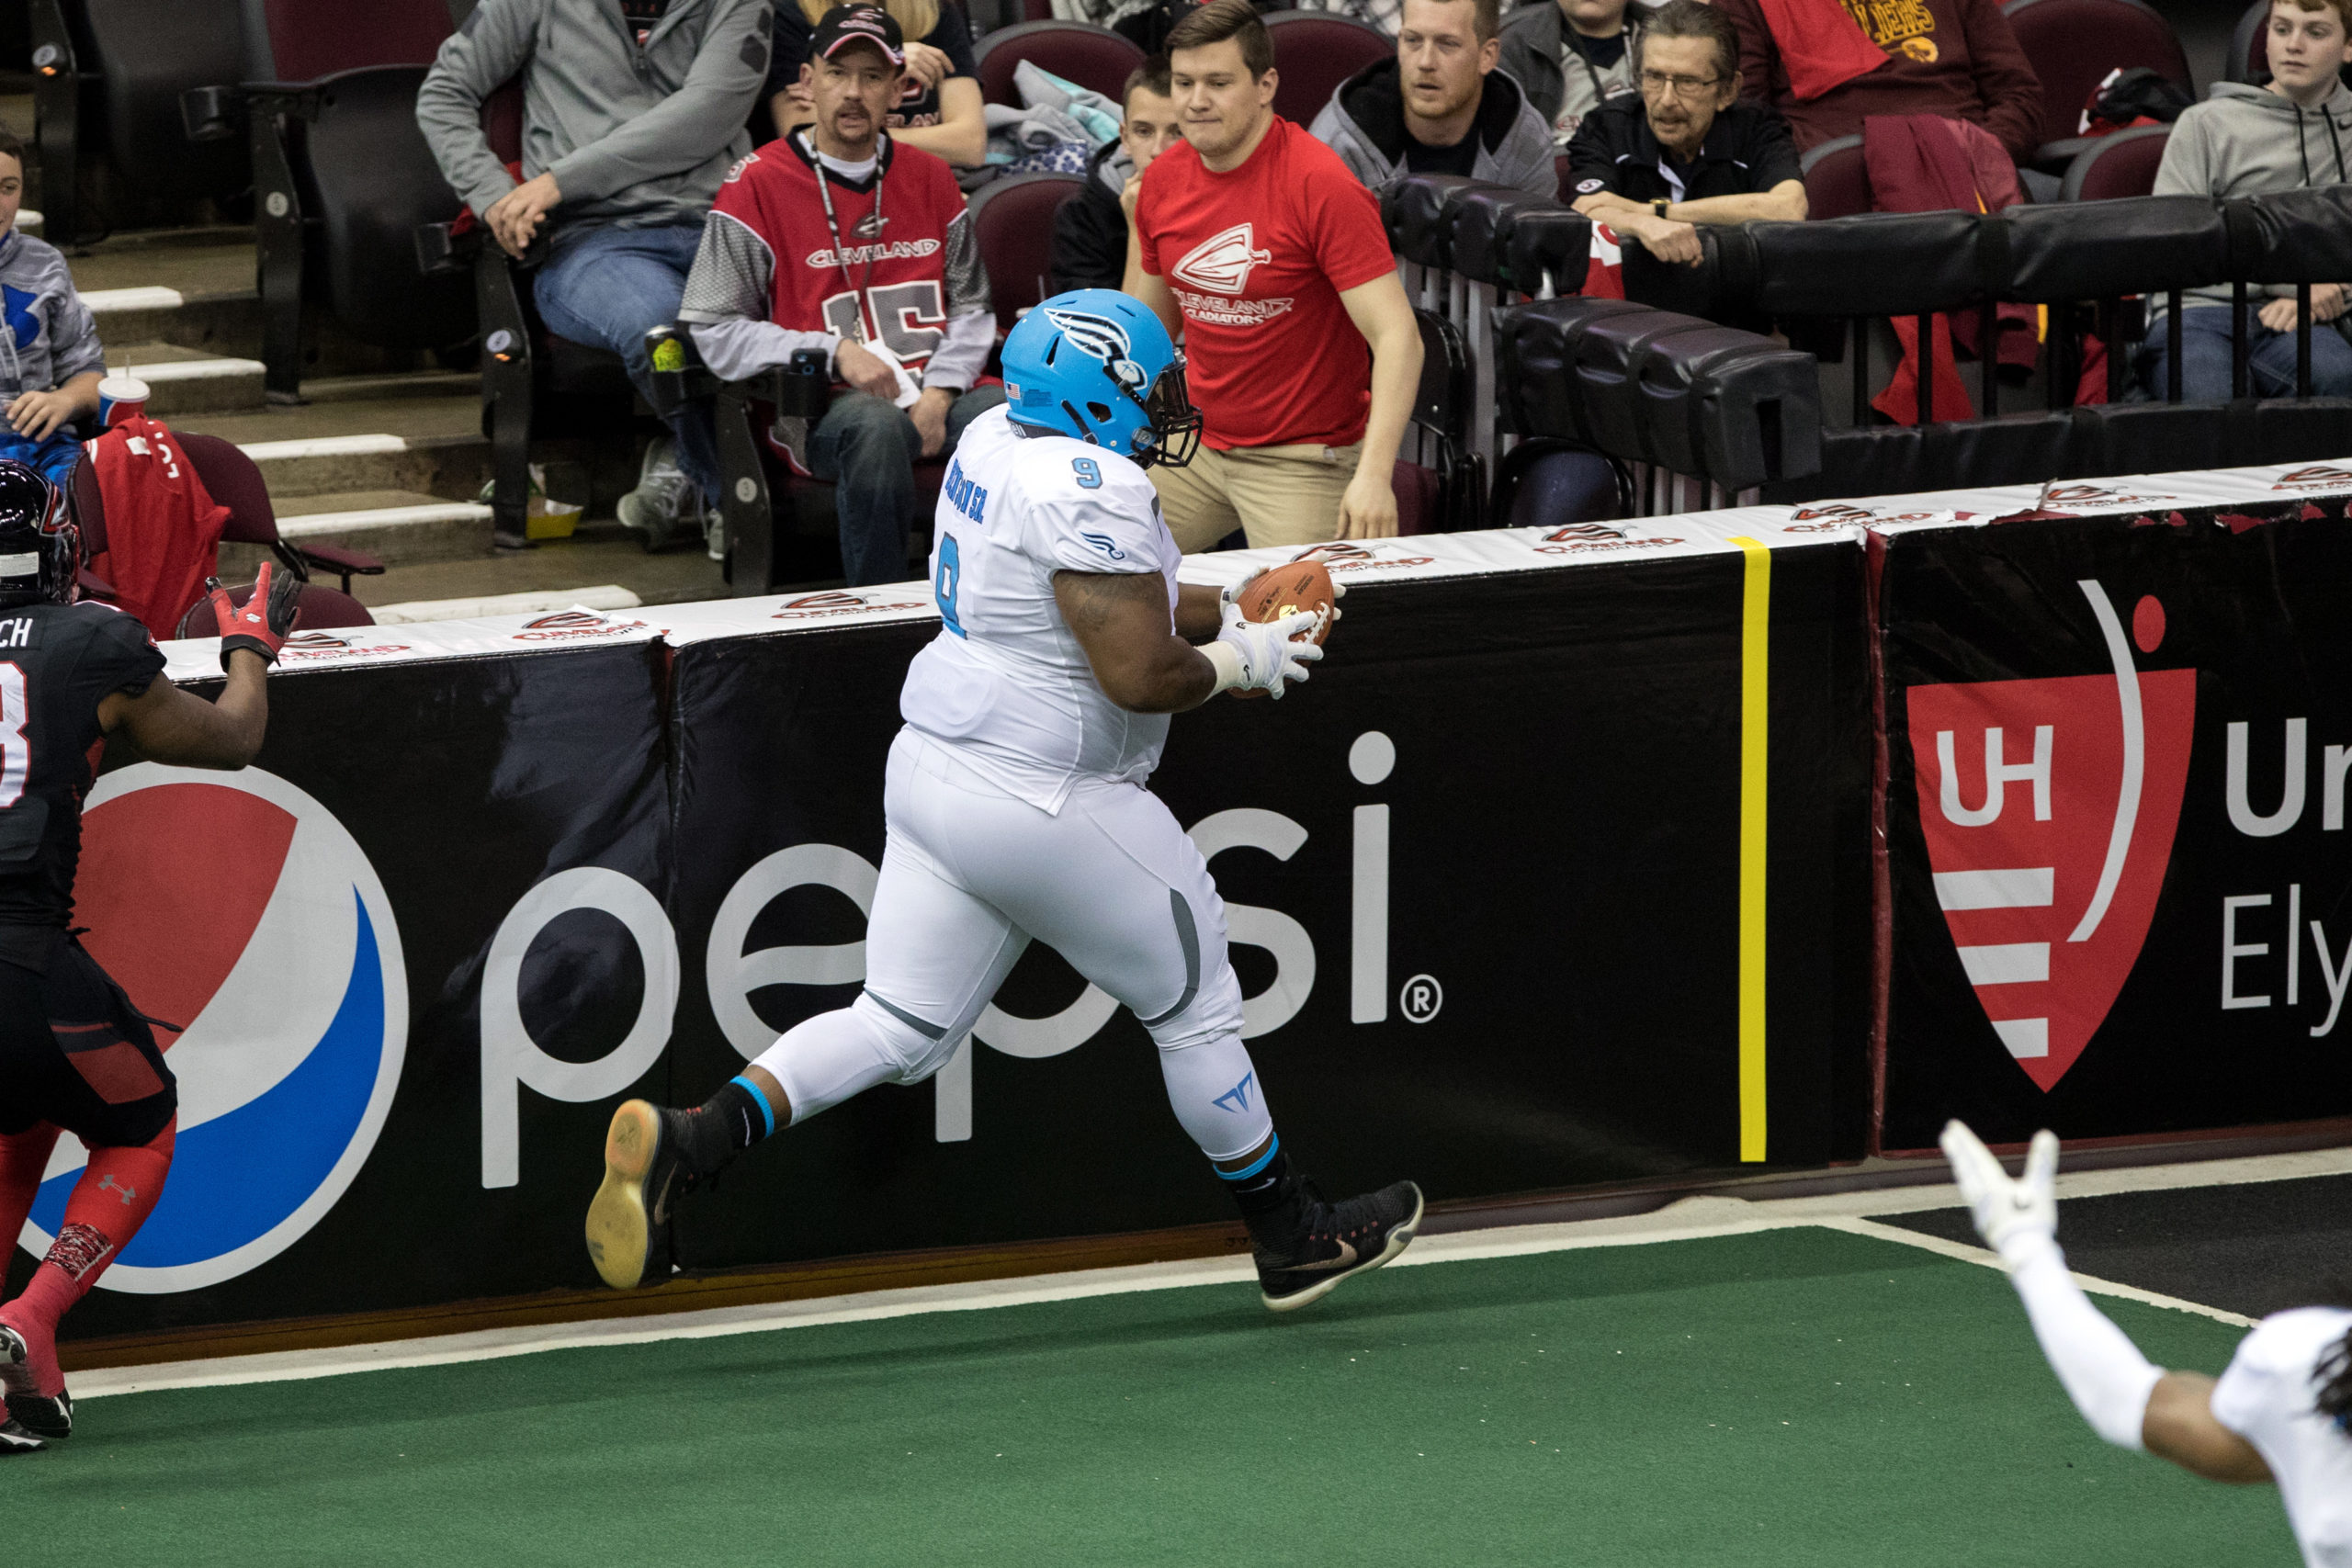 CLEVELAND, OH - MAY 06: Philadelphia Soul FB Mykel Benson (9) makes a catch and takes it 30 yards for a touchdown during the first quarter of the Arena Football League game between the Philadelphia Soul and Cleveland Gladiators on May 6, 2017, at Quicken Loans Arena in Cleveland, OH. Philadelphia defeated Cleveland 69-67. (Photo by Frank Jansky/Icon Sportswire via Getty Images)